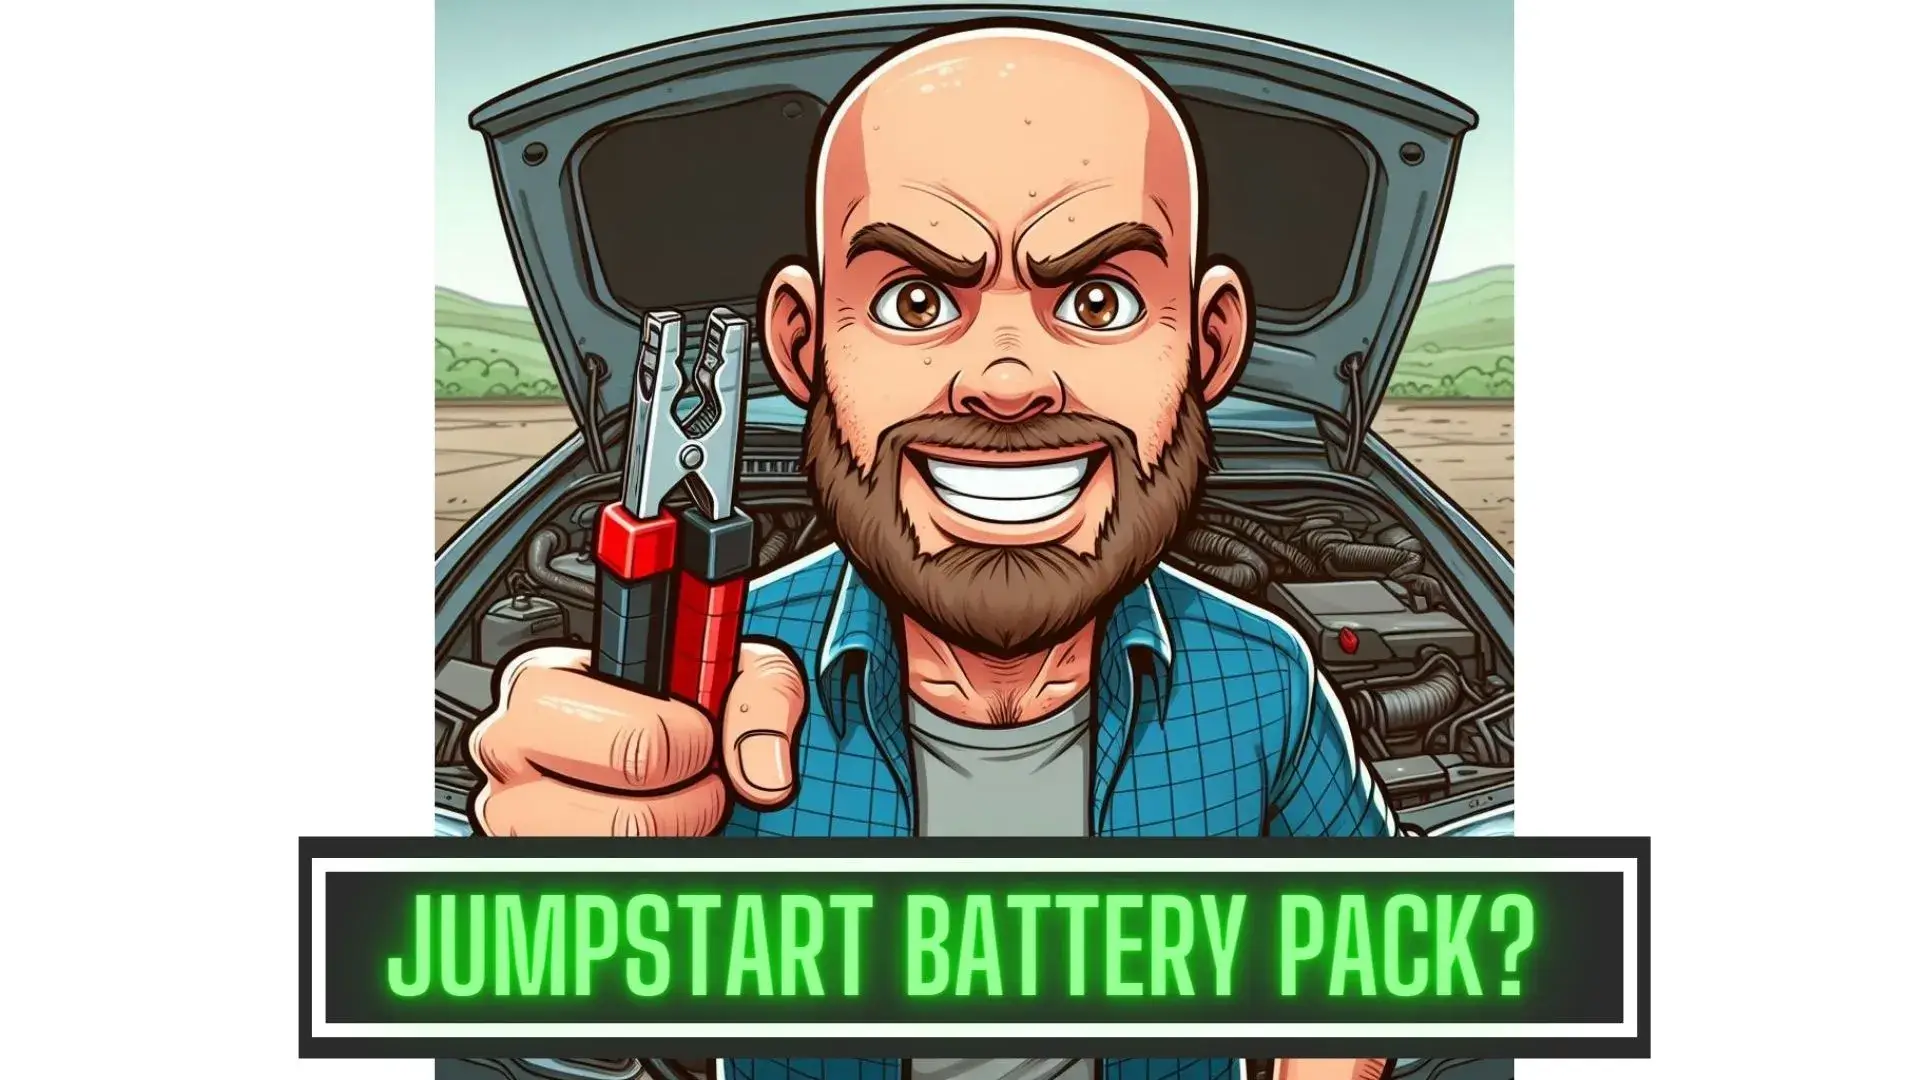 How Do You Jumpstart a Car with a Battery Pack